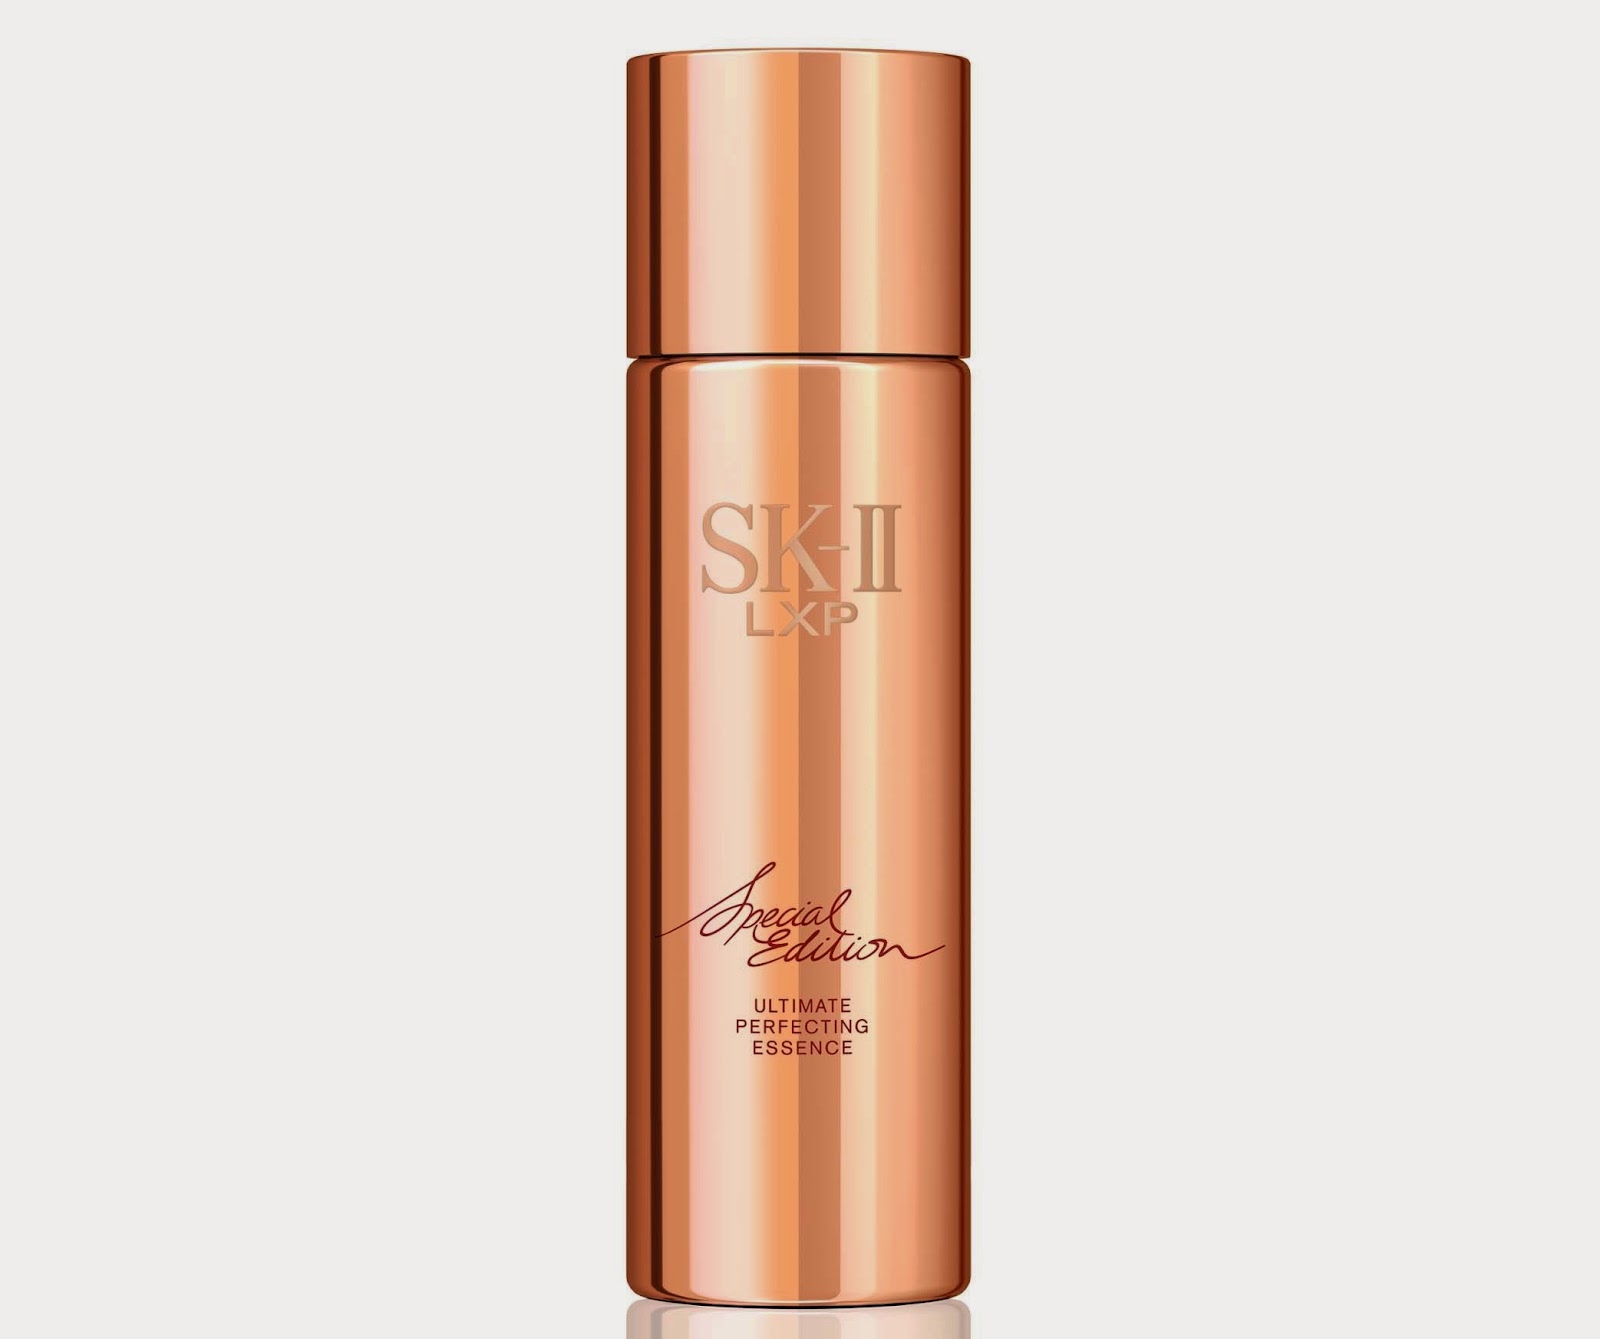 SK-II Special Edition LXP Ultimate Perfecting Essence, Cate Blanchett, SK-II Finest Inspiration Set, Ultimate Perfecting Serum, Ultimate Perfecting Cream, Ultimate Perfecting Eye Cream, luxury skincare, SK-II